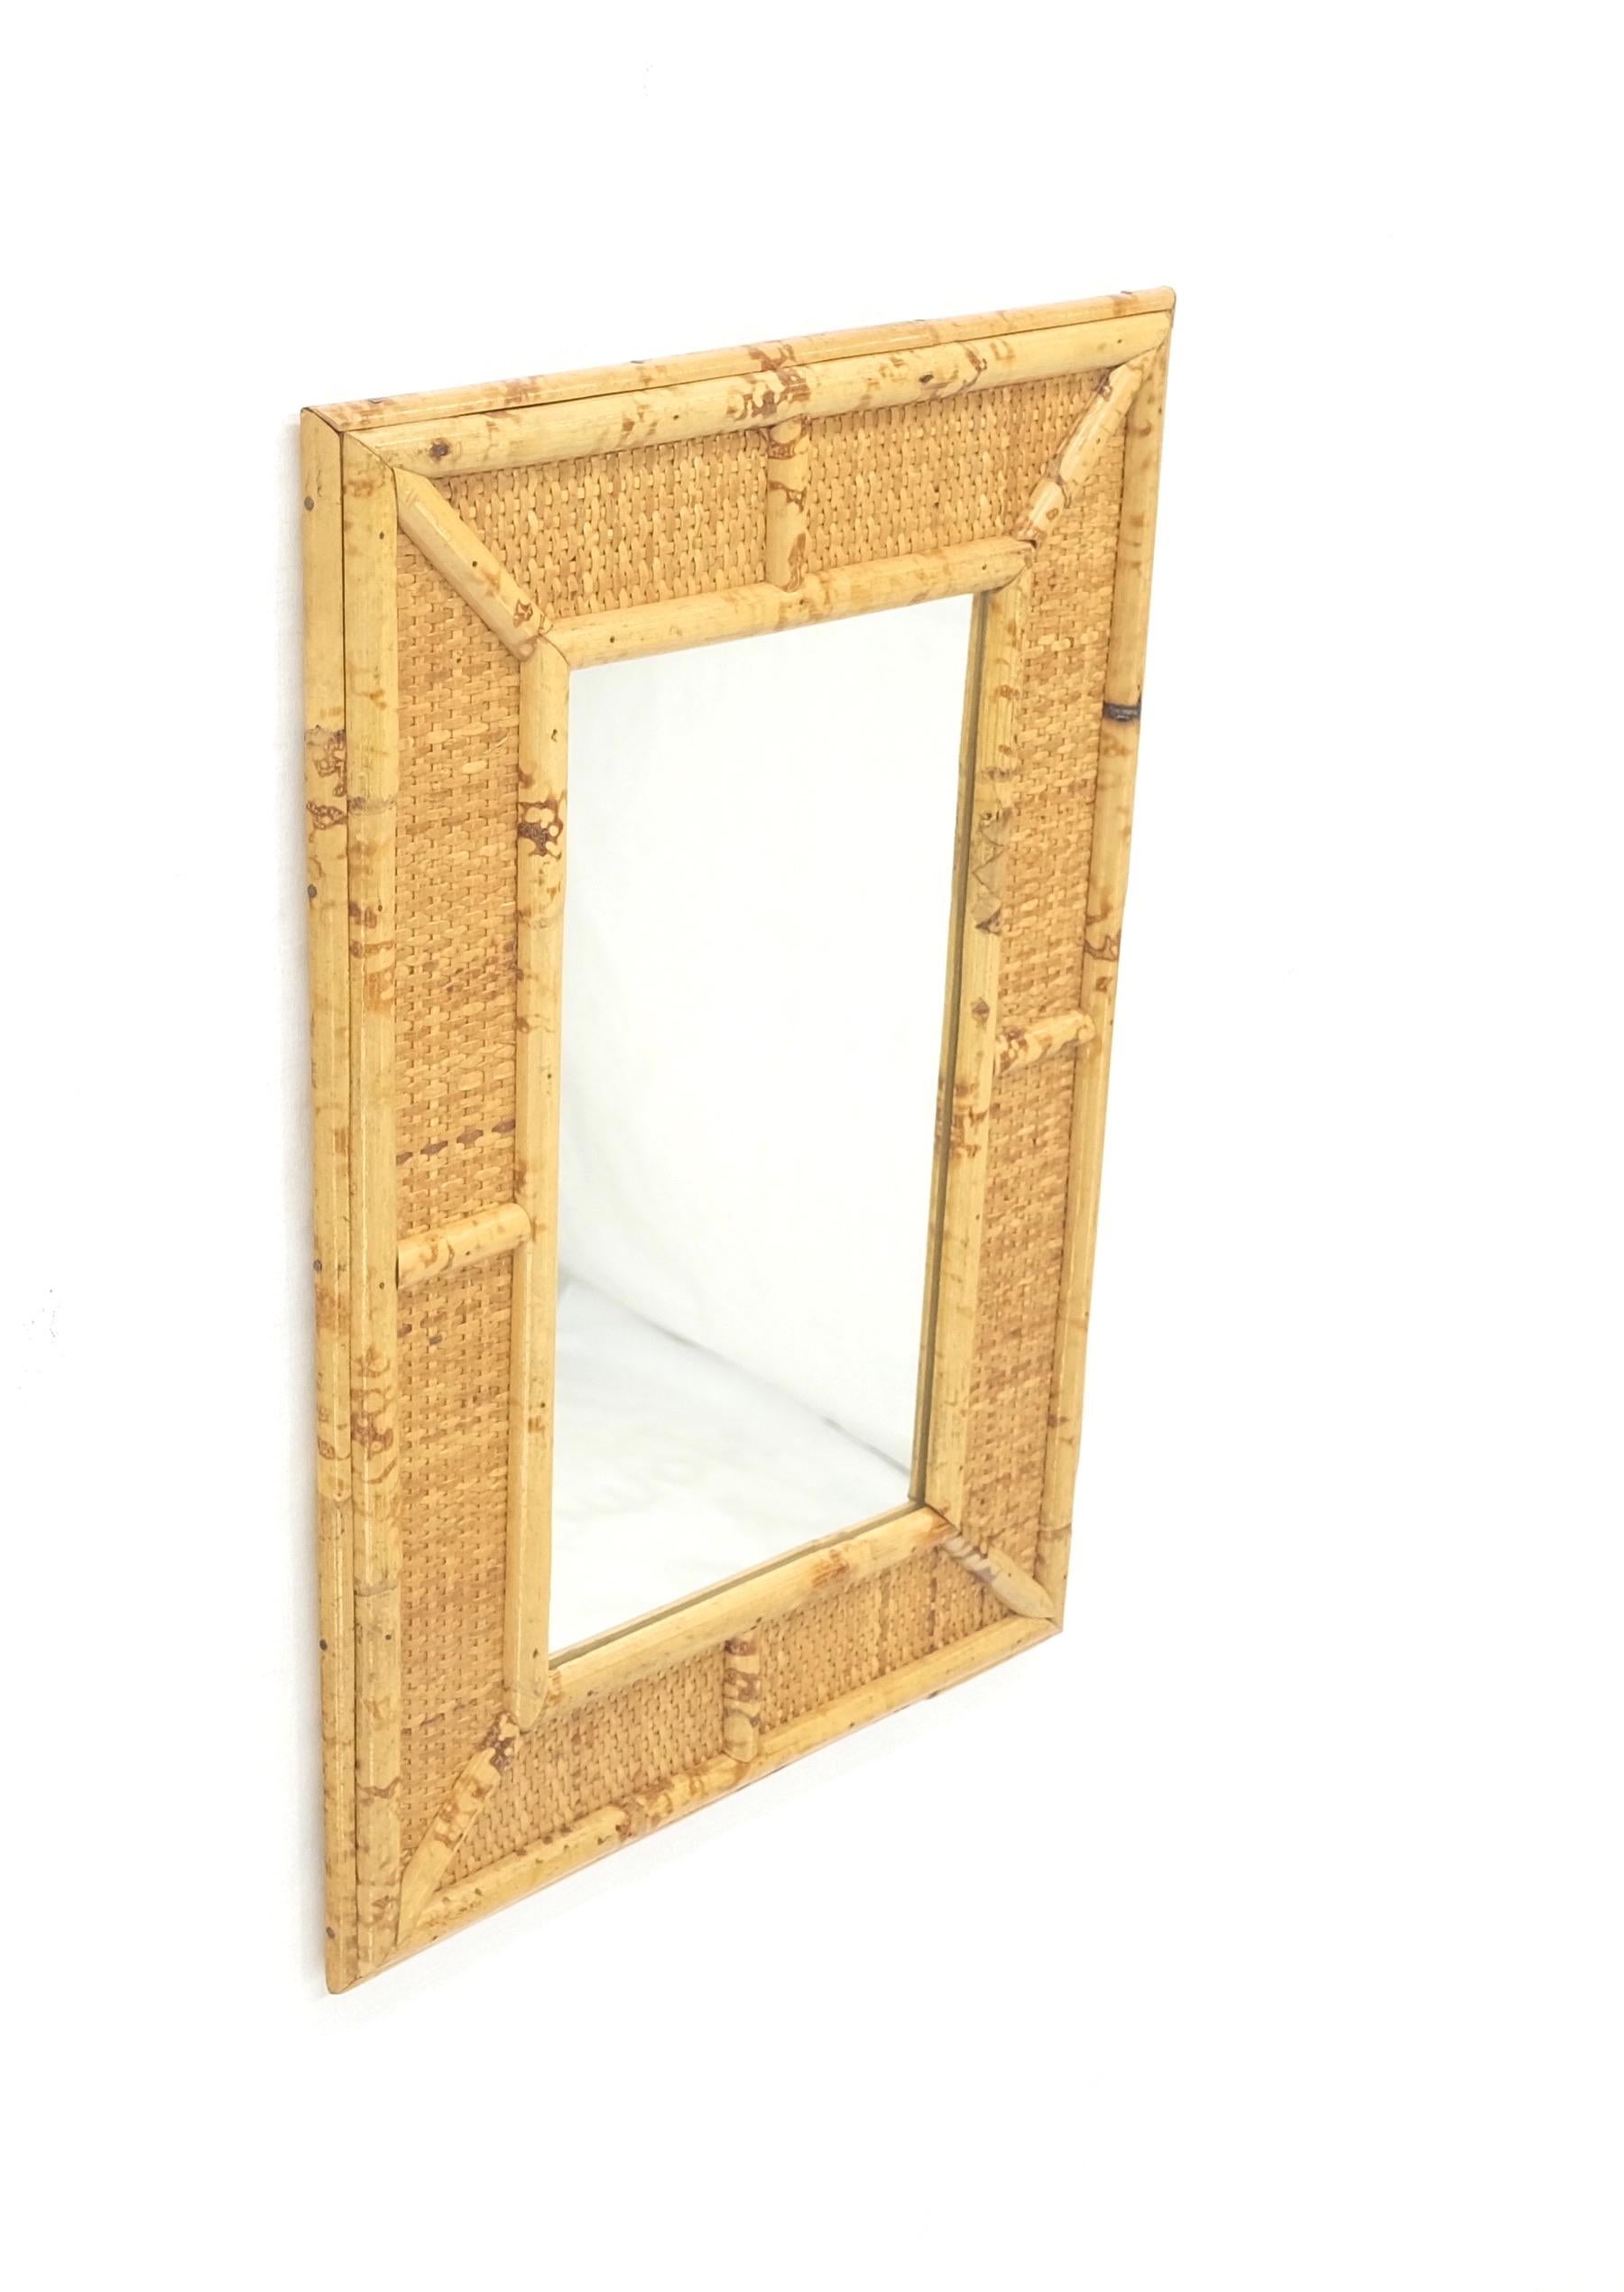 Compact Rectangle Bamboo Frame Decorative Mid Century Modern c1970s Wall Mirror  In Good Condition For Sale In Rockaway, NJ